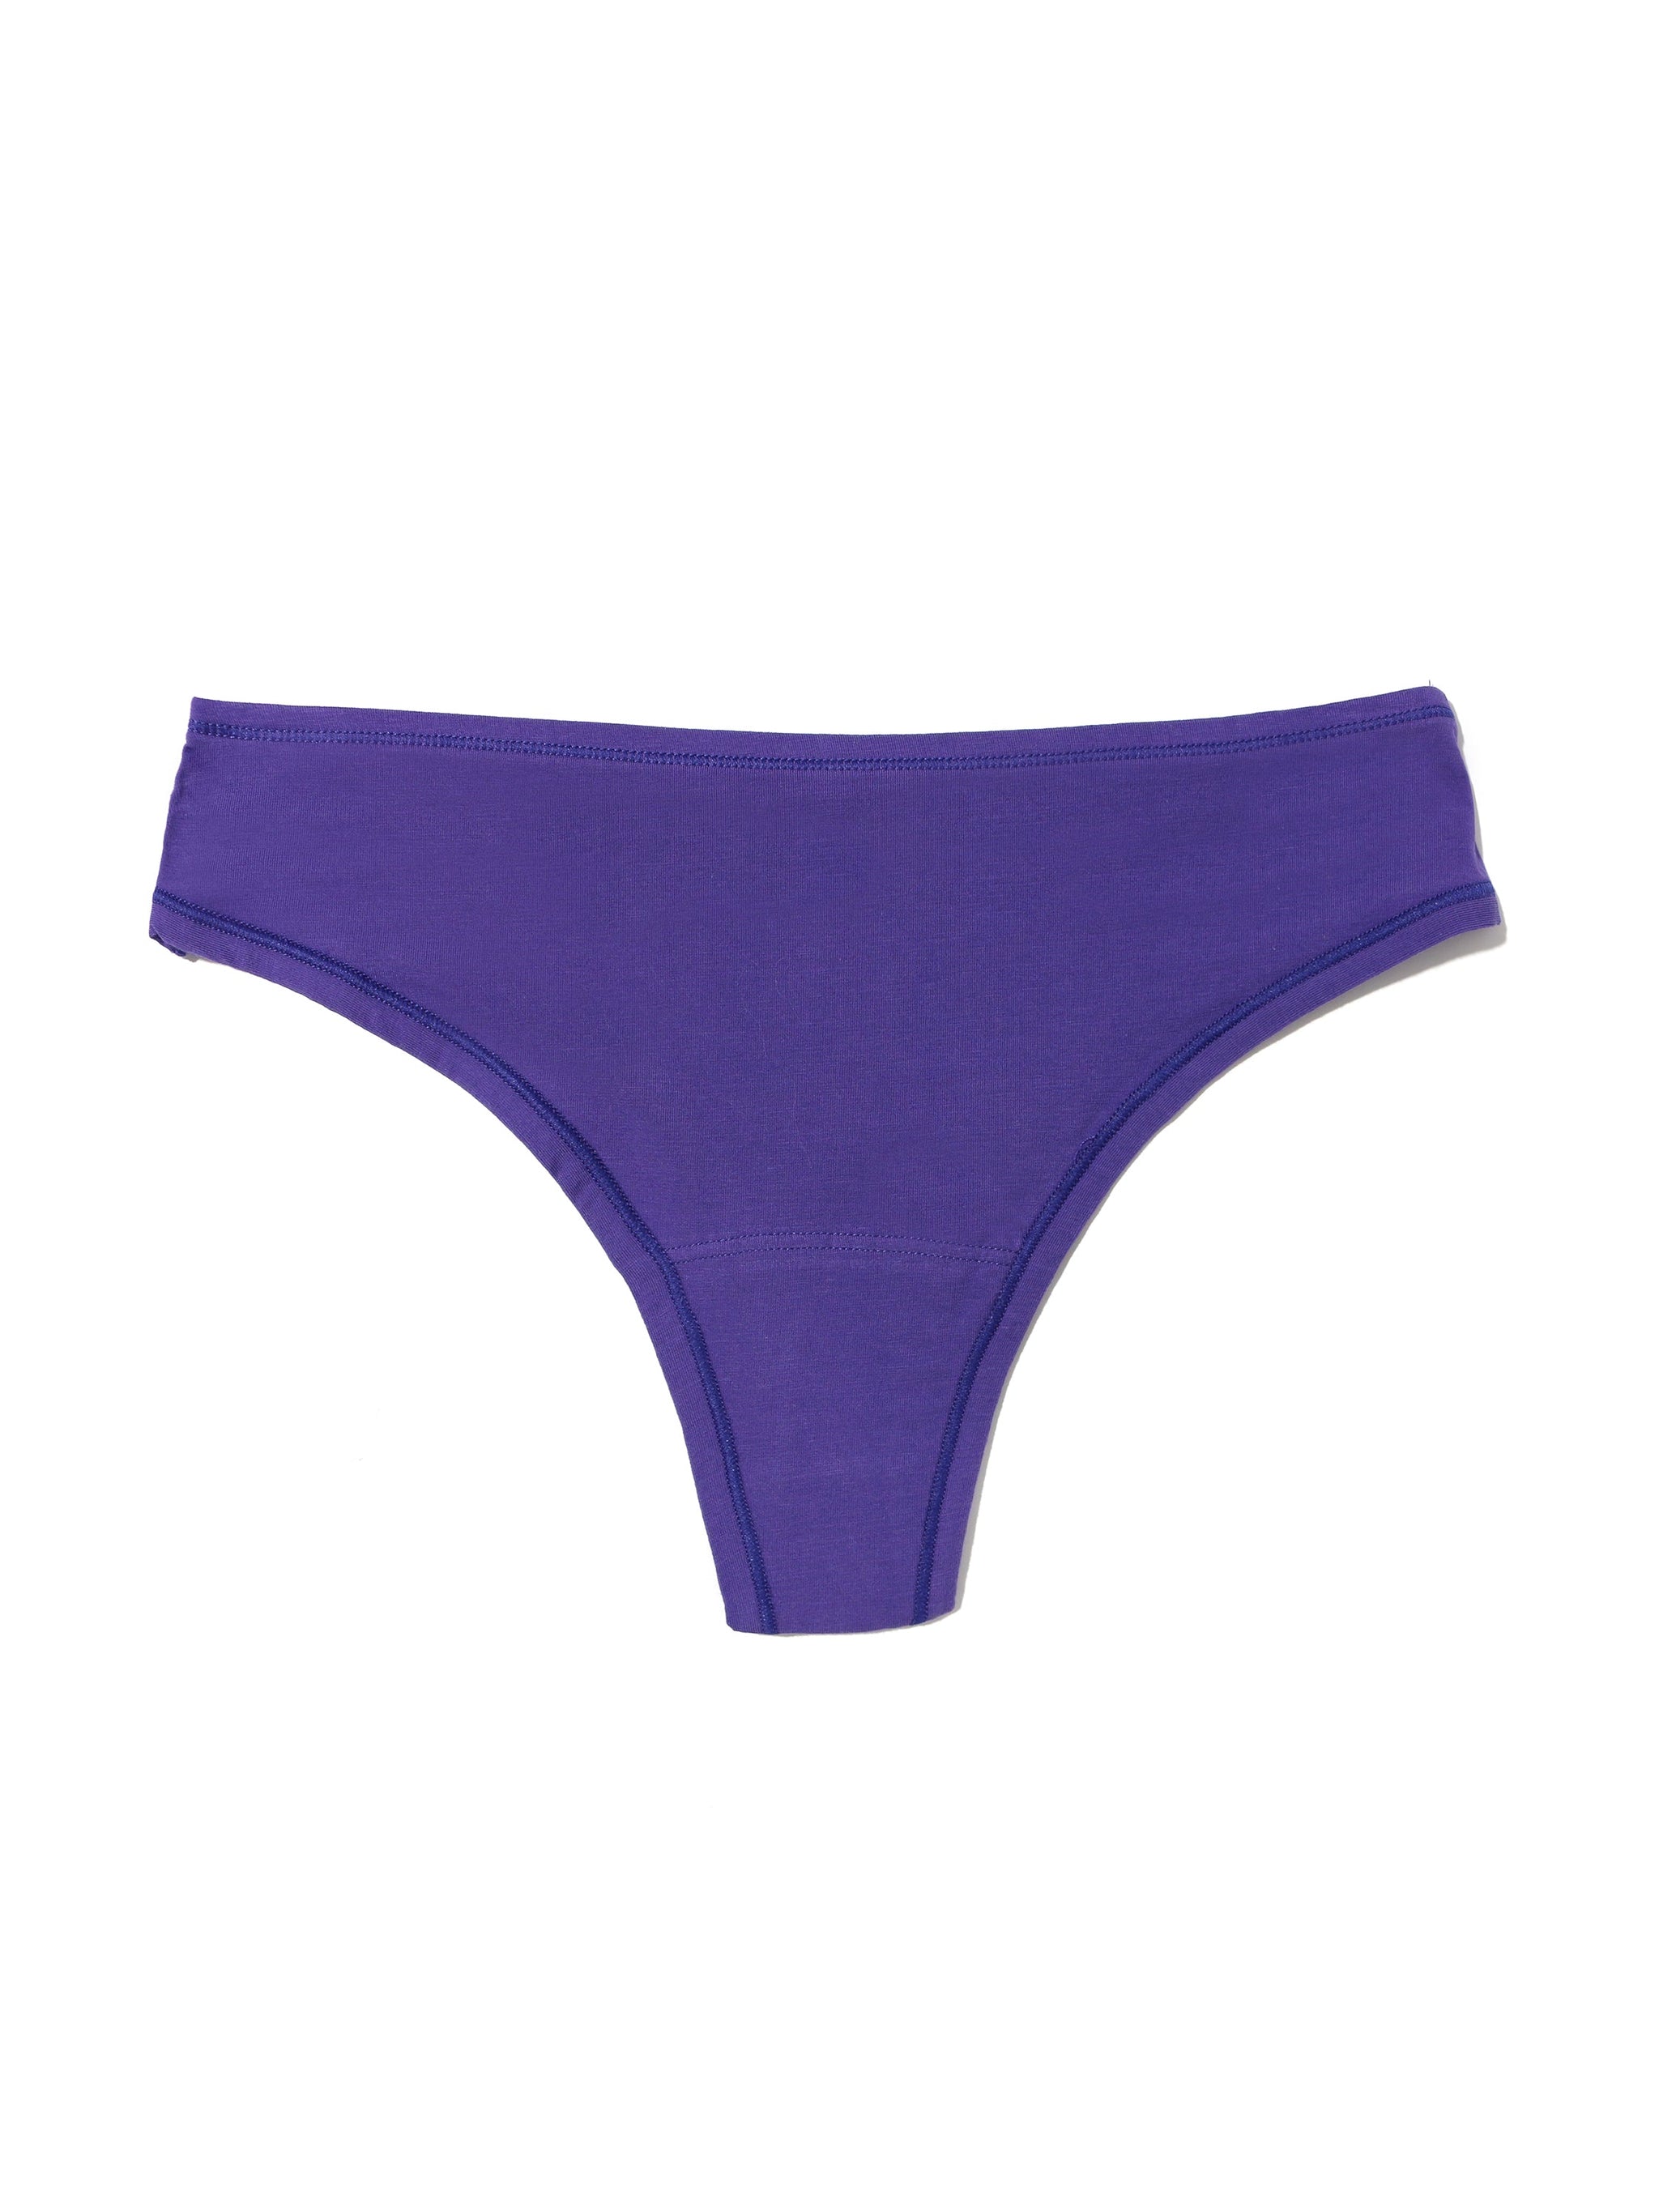 Amethyst High Waisted Underwear: Flatter Your Figure and Feel Confident